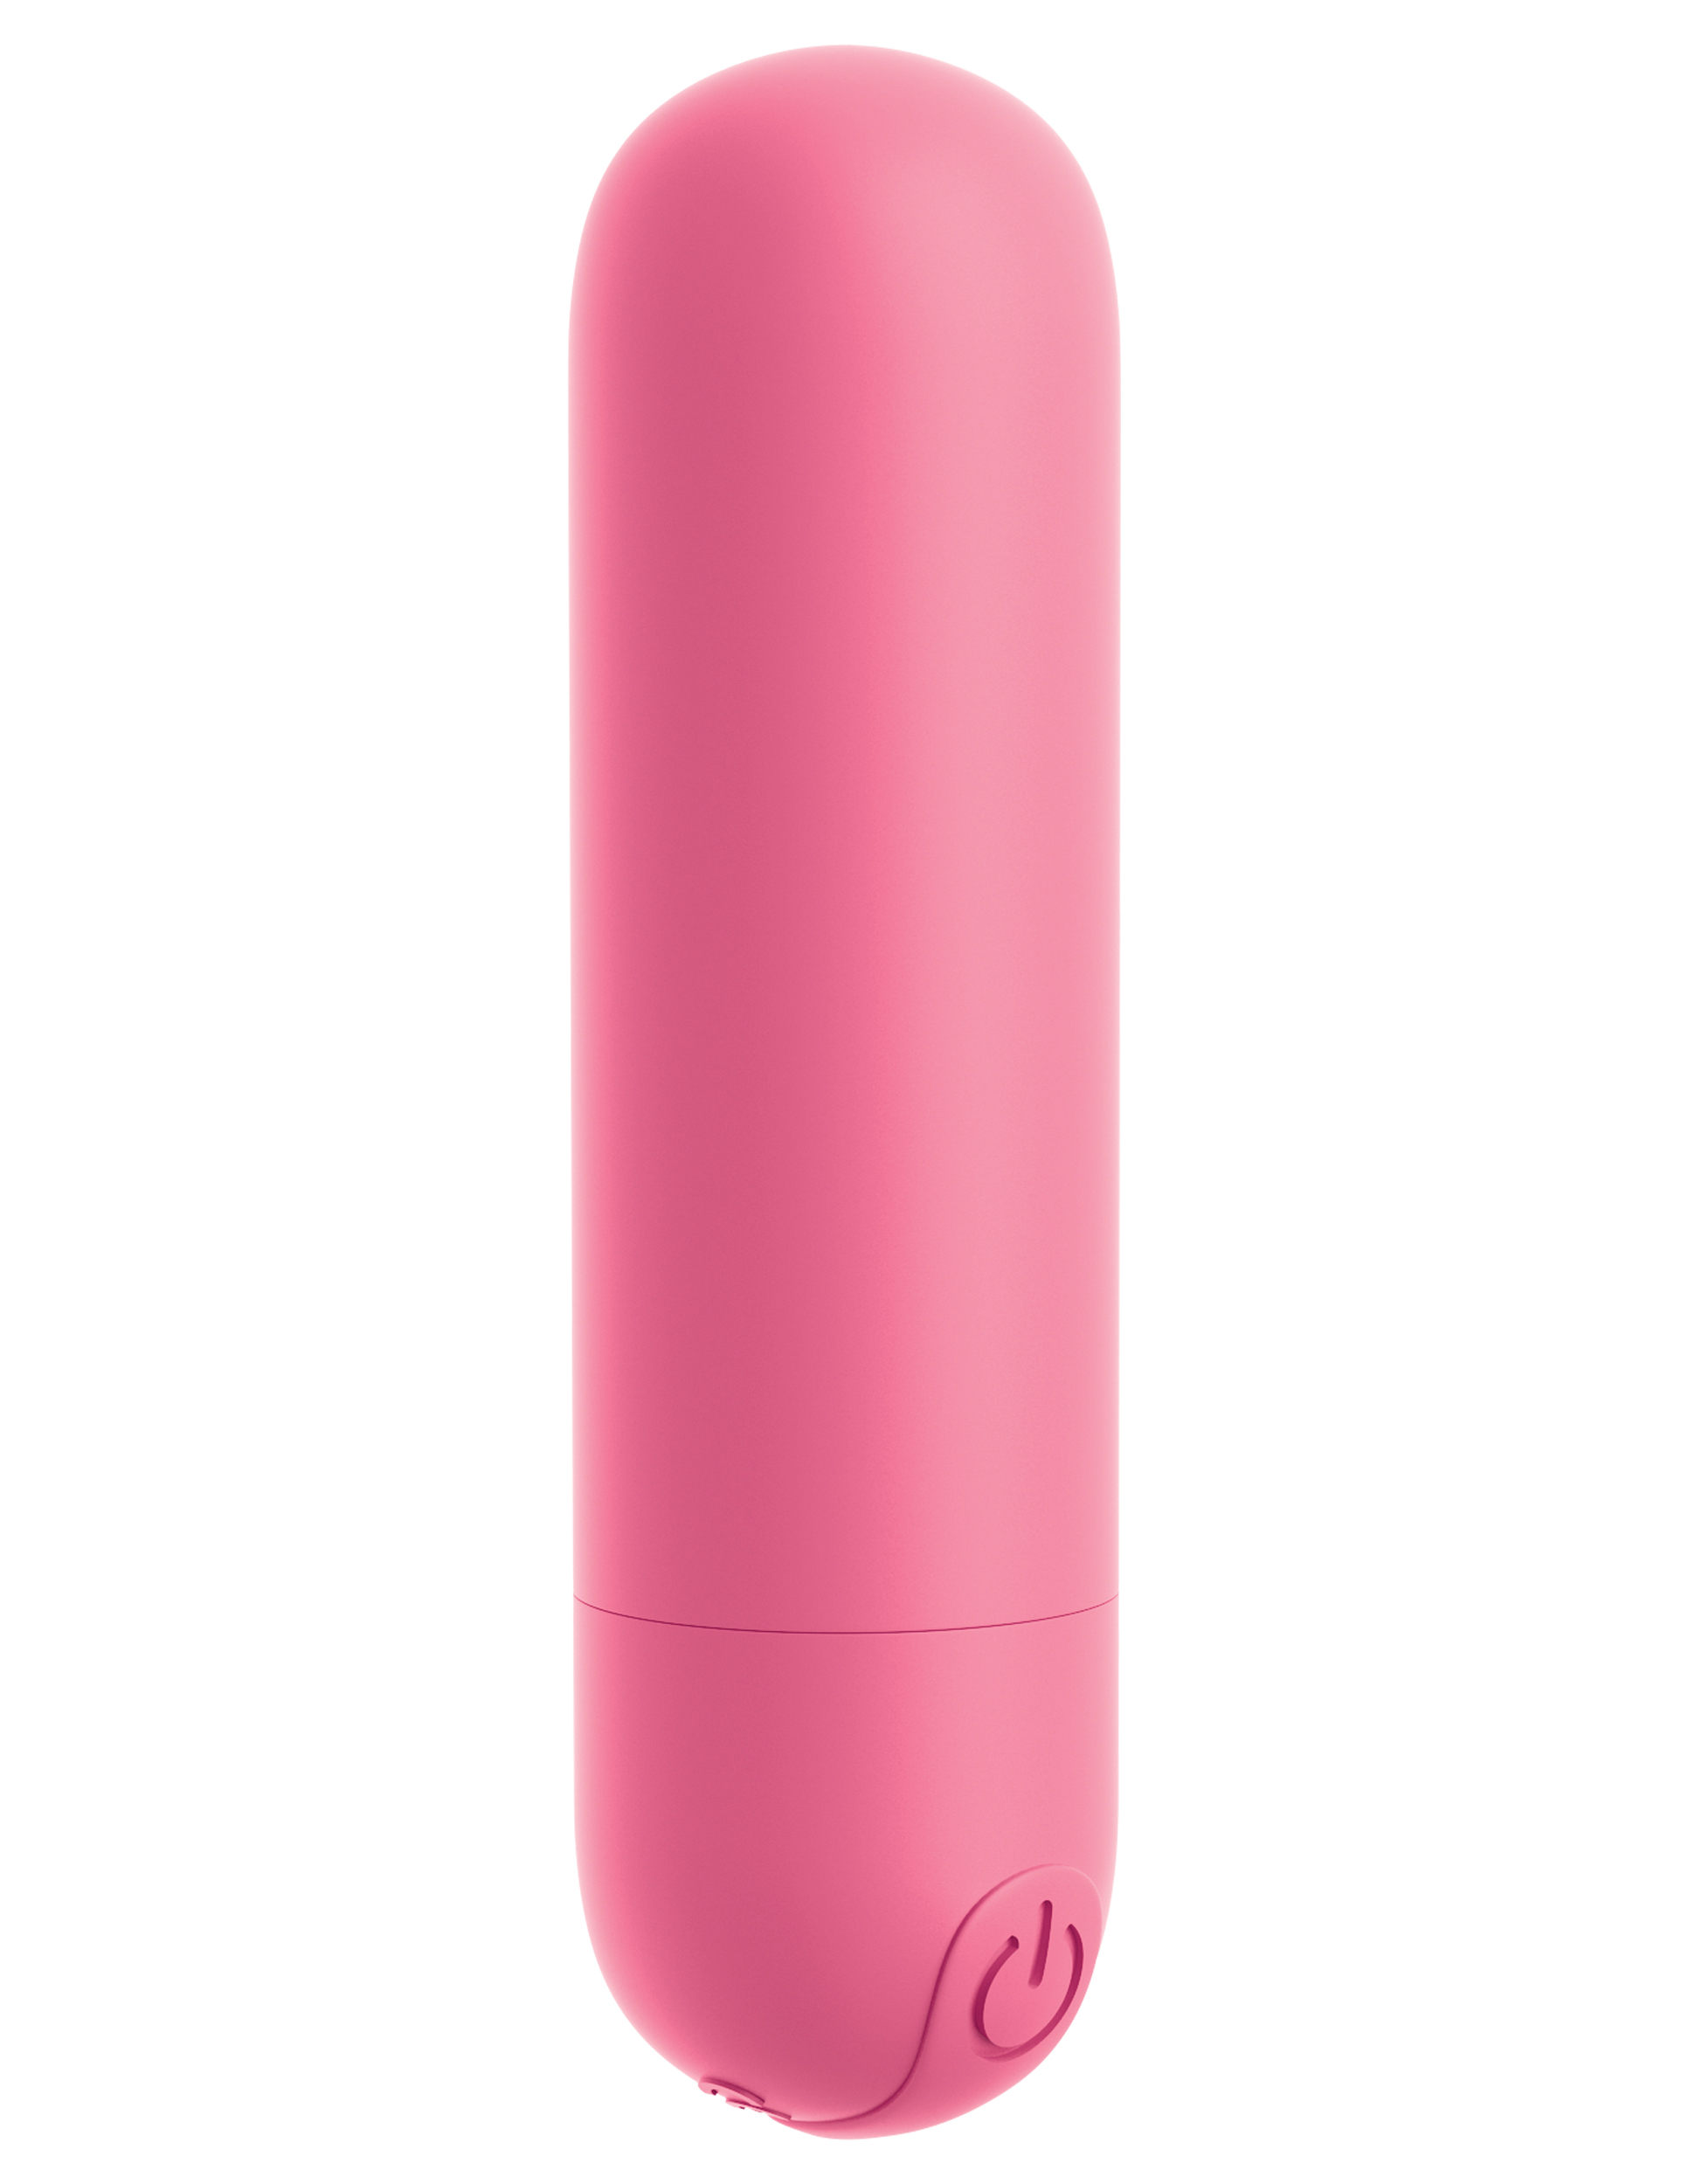 OMG%21+Bullets+Play+Rechargeable+Silicone+Vibrating+Bullet